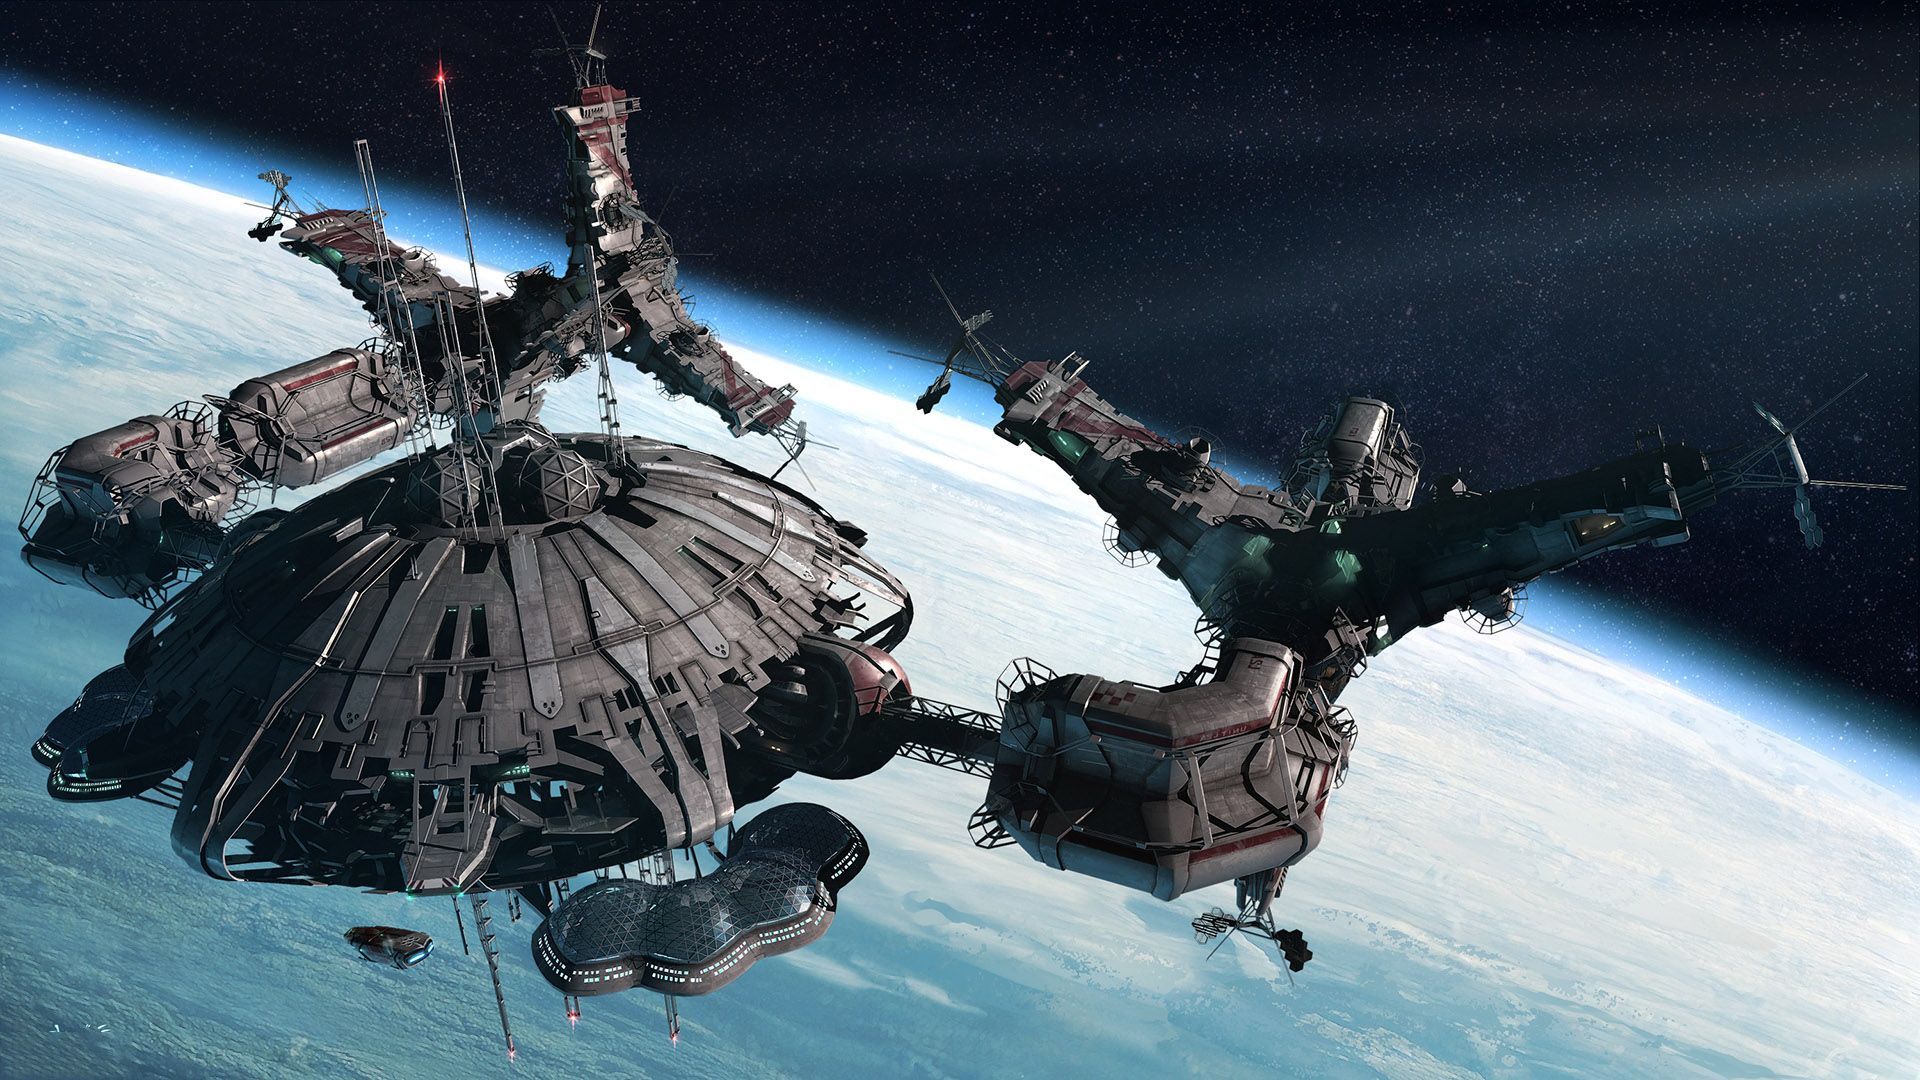 Space Station Widescreen Wallpaper